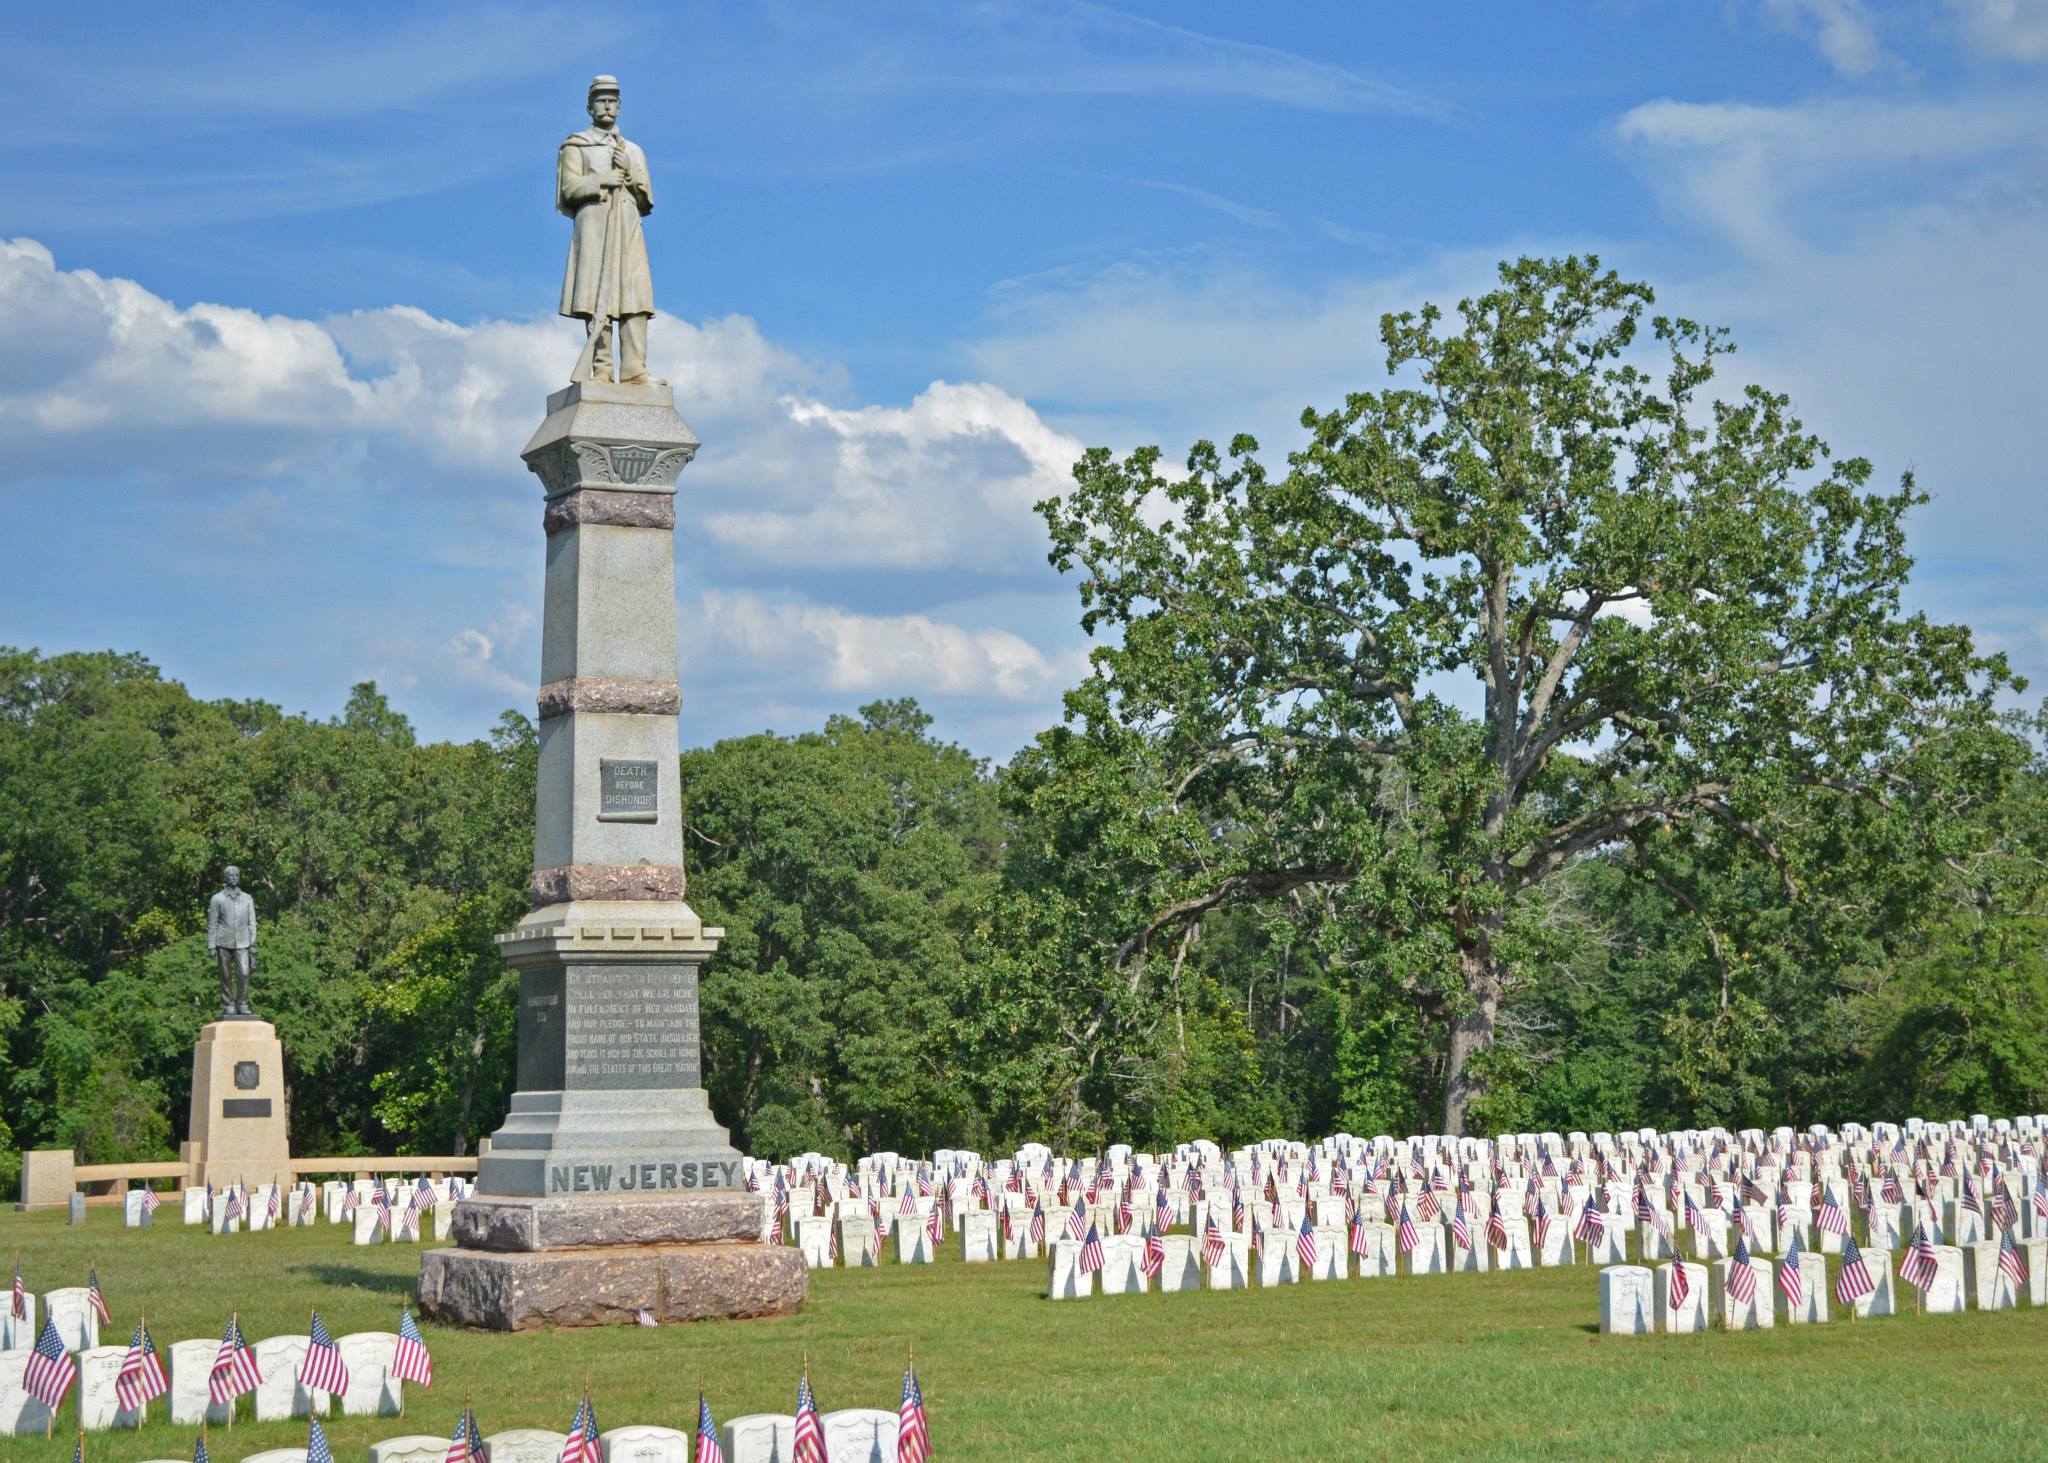 Monuments and graves with American flags